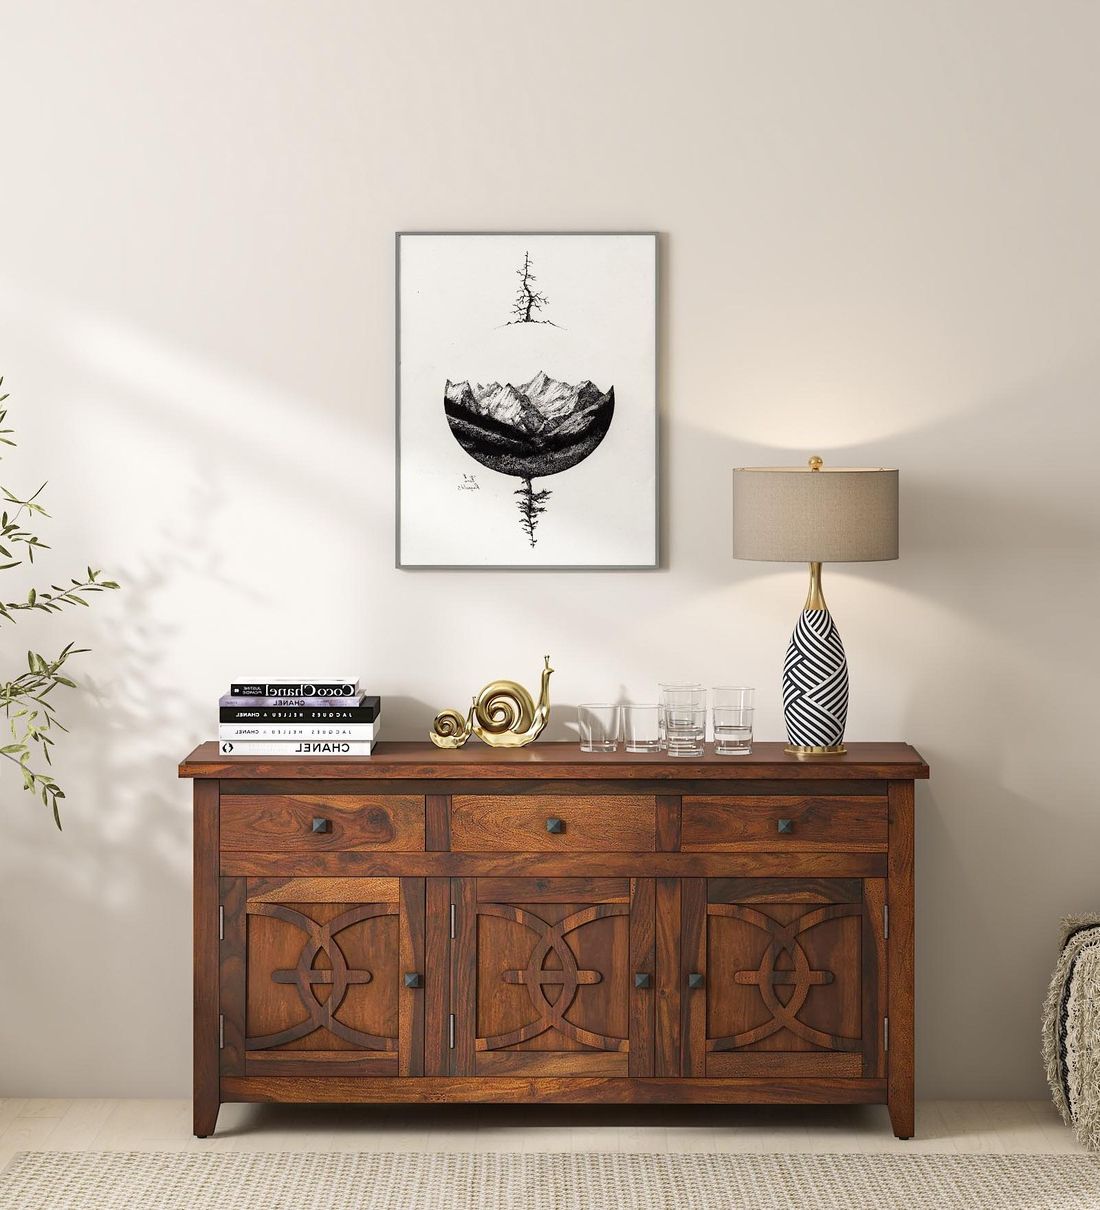 [%buy Karl Sheesham Wood Sideboard In Scratch Resistant Honey Oak Finish At  4% Offwoodsworth From Pepperfry | Pepperfry For Popular Solid Wood Buffet Sideboards|solid Wood Buffet Sideboards Intended For Favorite Buy Karl Sheesham Wood Sideboard In Scratch Resistant Honey Oak Finish At  4% Offwoodsworth From Pepperfry | Pepperfry|2019 Solid Wood Buffet Sideboards Within Buy Karl Sheesham Wood Sideboard In Scratch Resistant Honey Oak Finish At  4% Offwoodsworth From Pepperfry | Pepperfry|latest Buy Karl Sheesham Wood Sideboard In Scratch Resistant Honey Oak Finish At  4% Offwoodsworth From Pepperfry | Pepperfry For Solid Wood Buffet Sideboards%] (View 13 of 15)